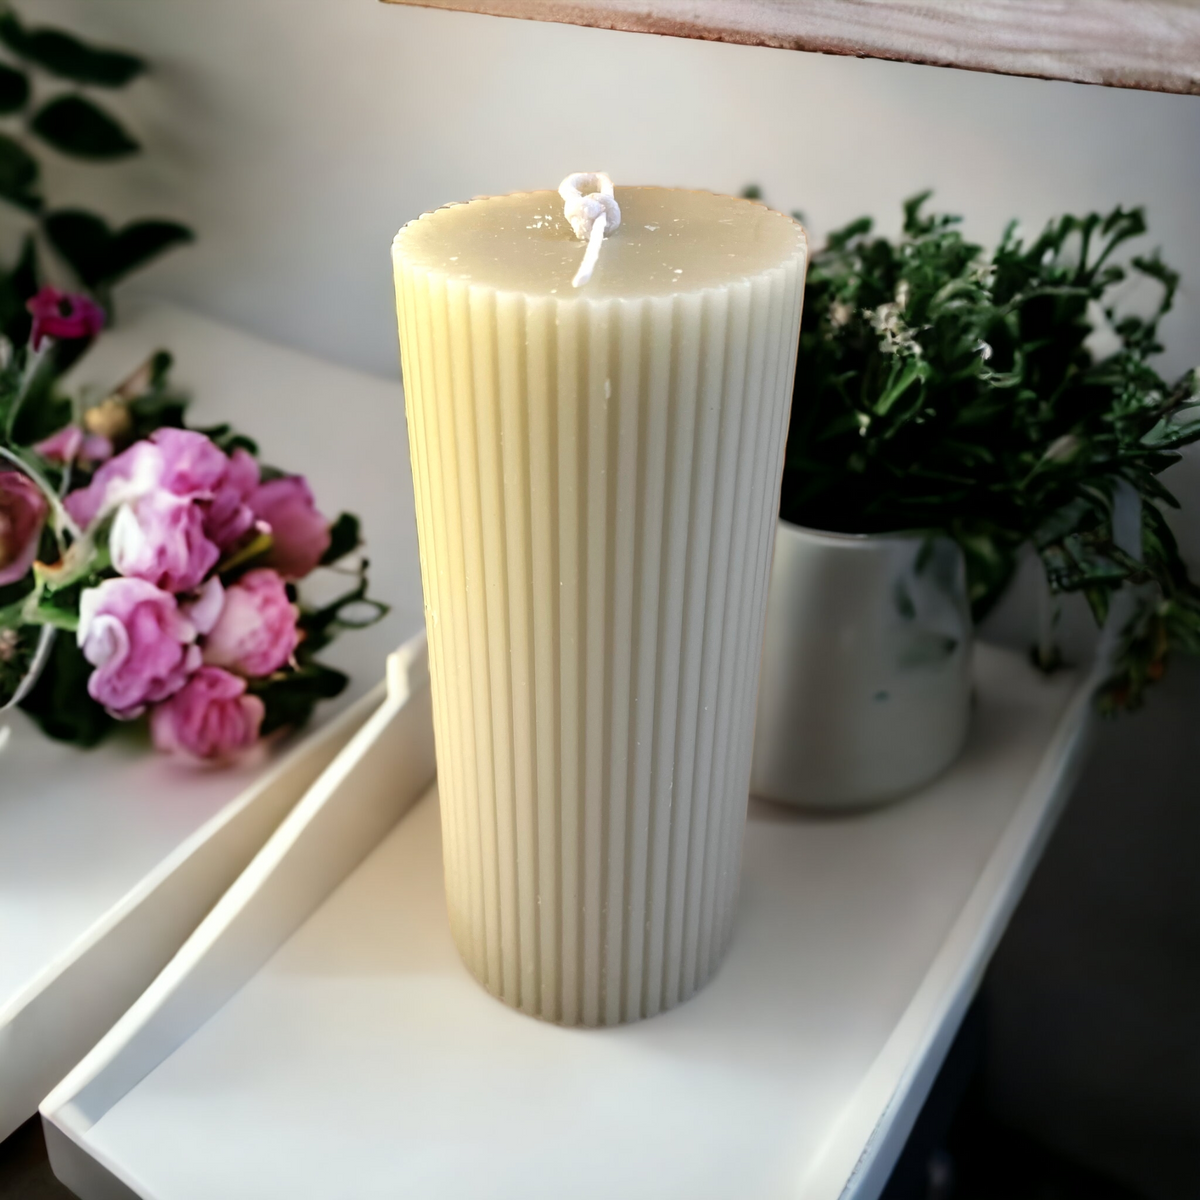 Vanilla Scented Wax Pillar Candles in Blush or Stone